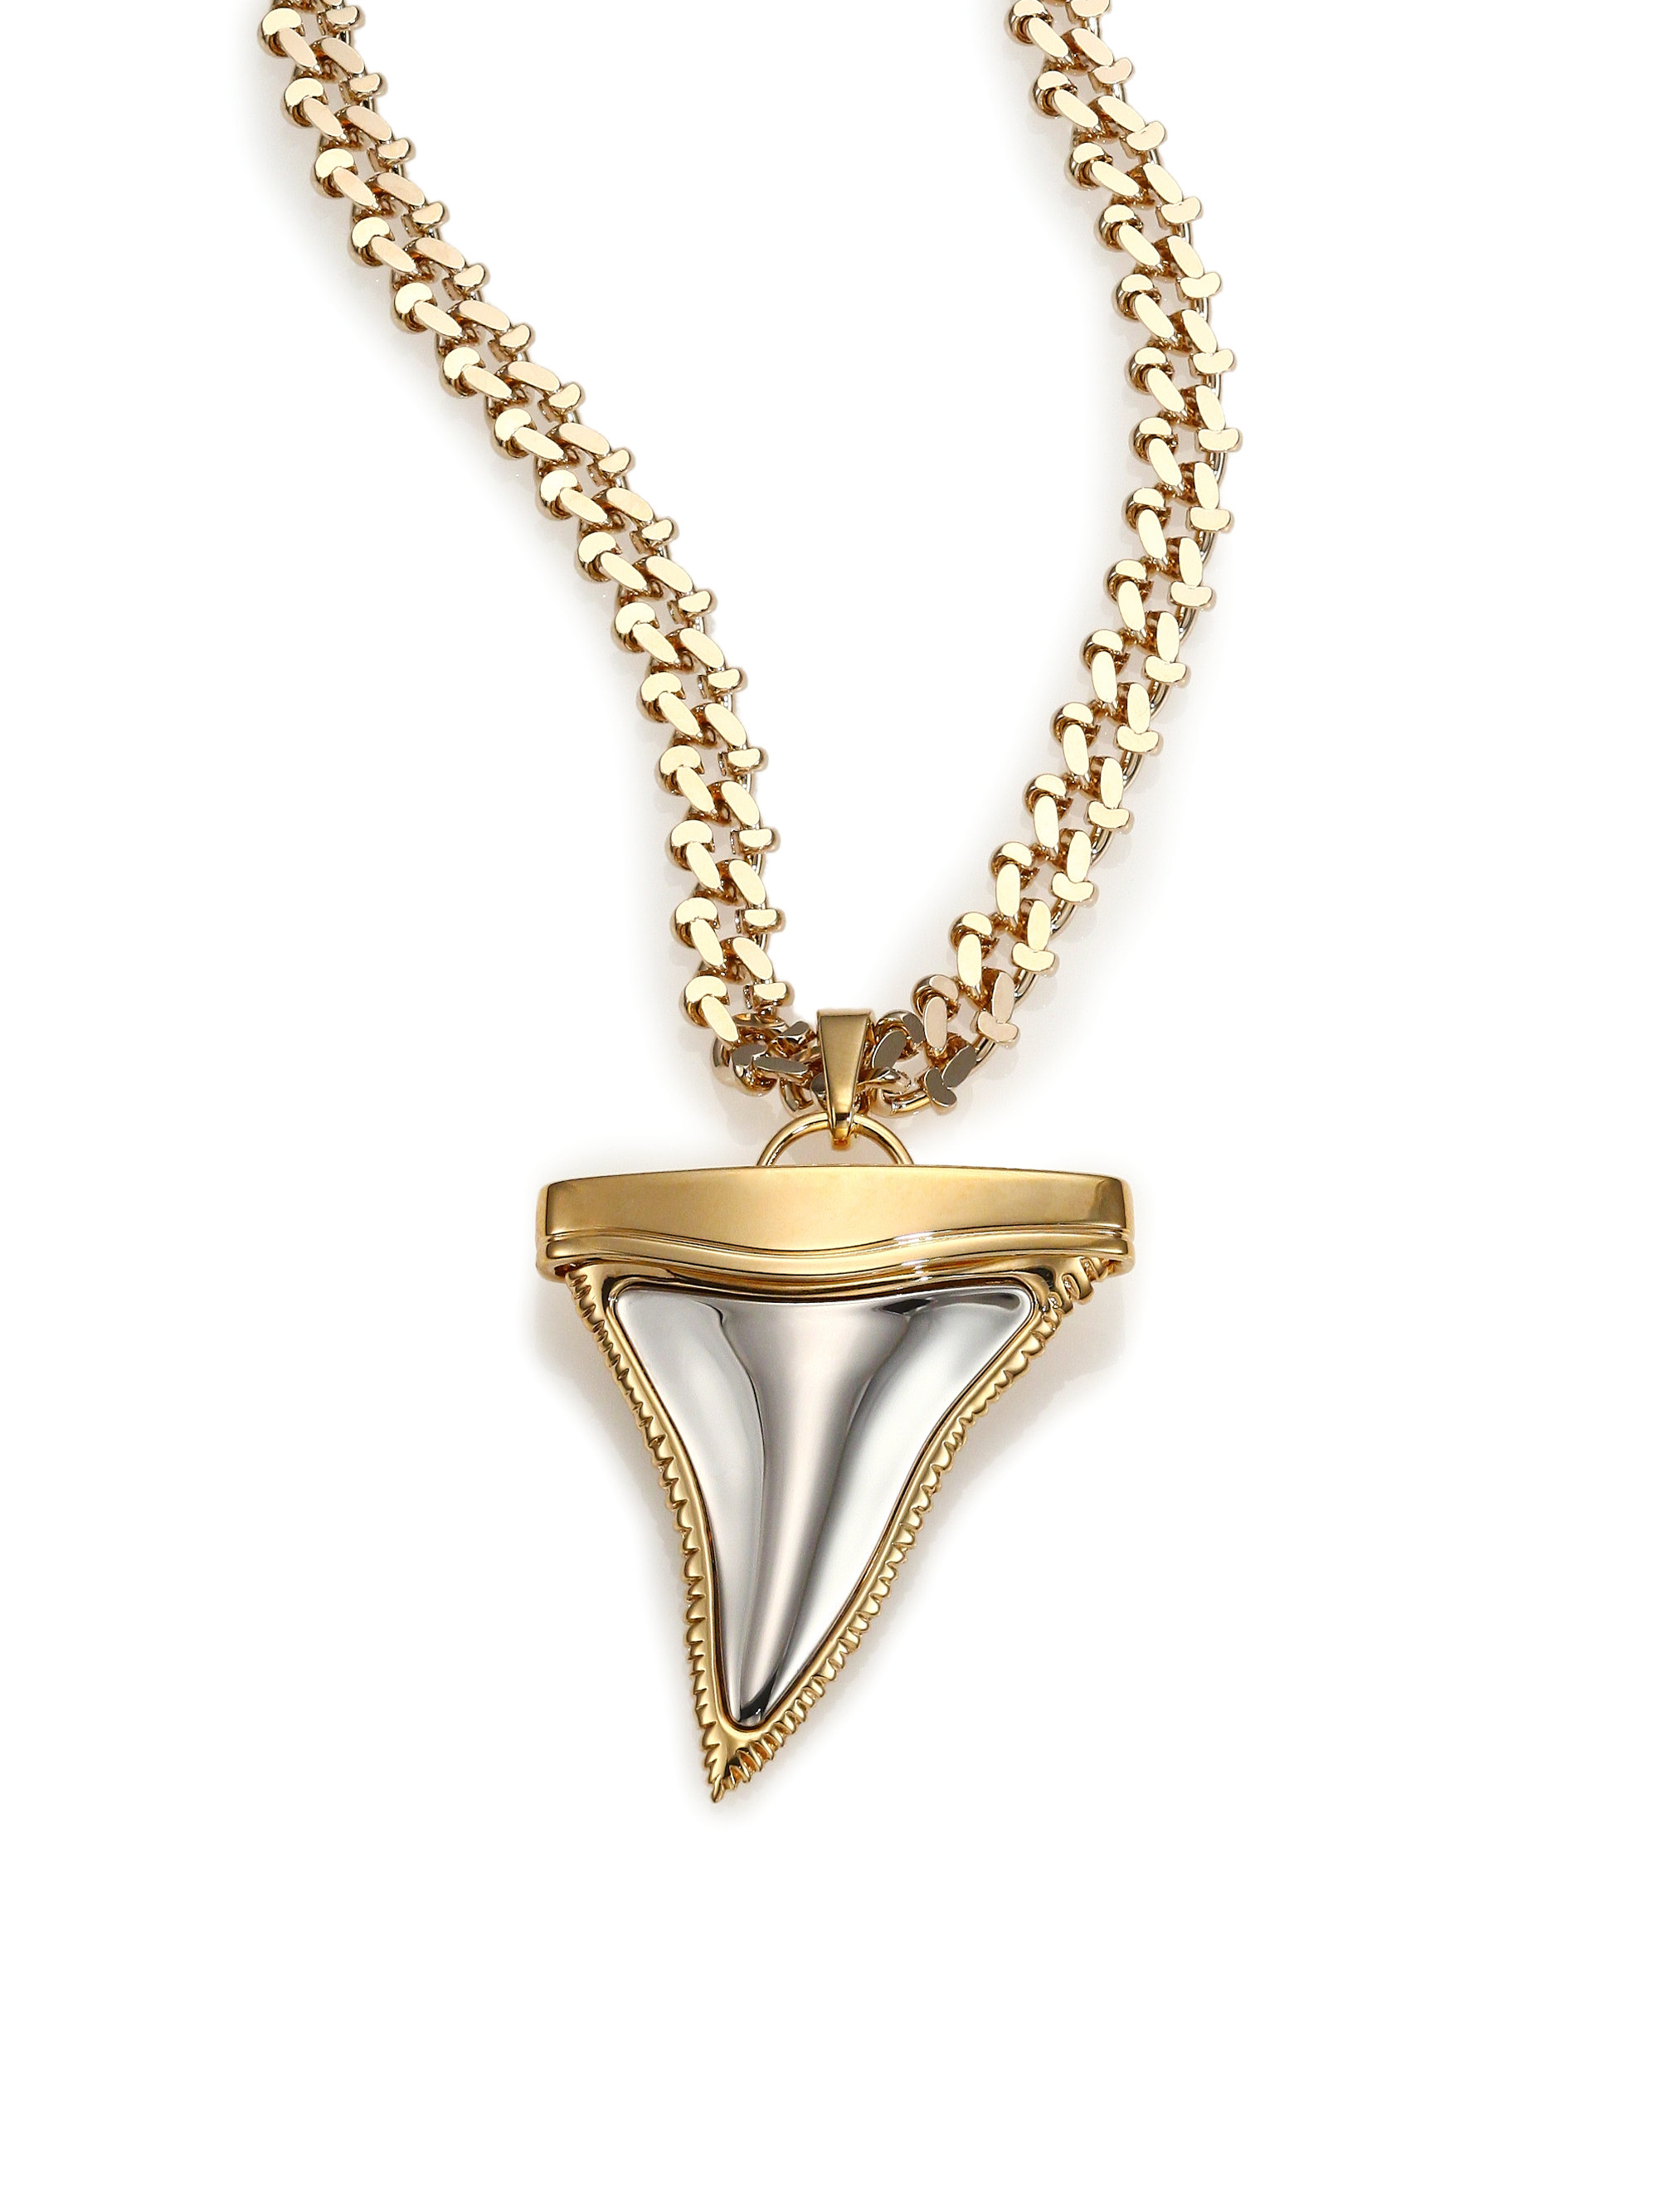 Lyst - Givenchy Shark Tooth Pendant Necklace in Metallic